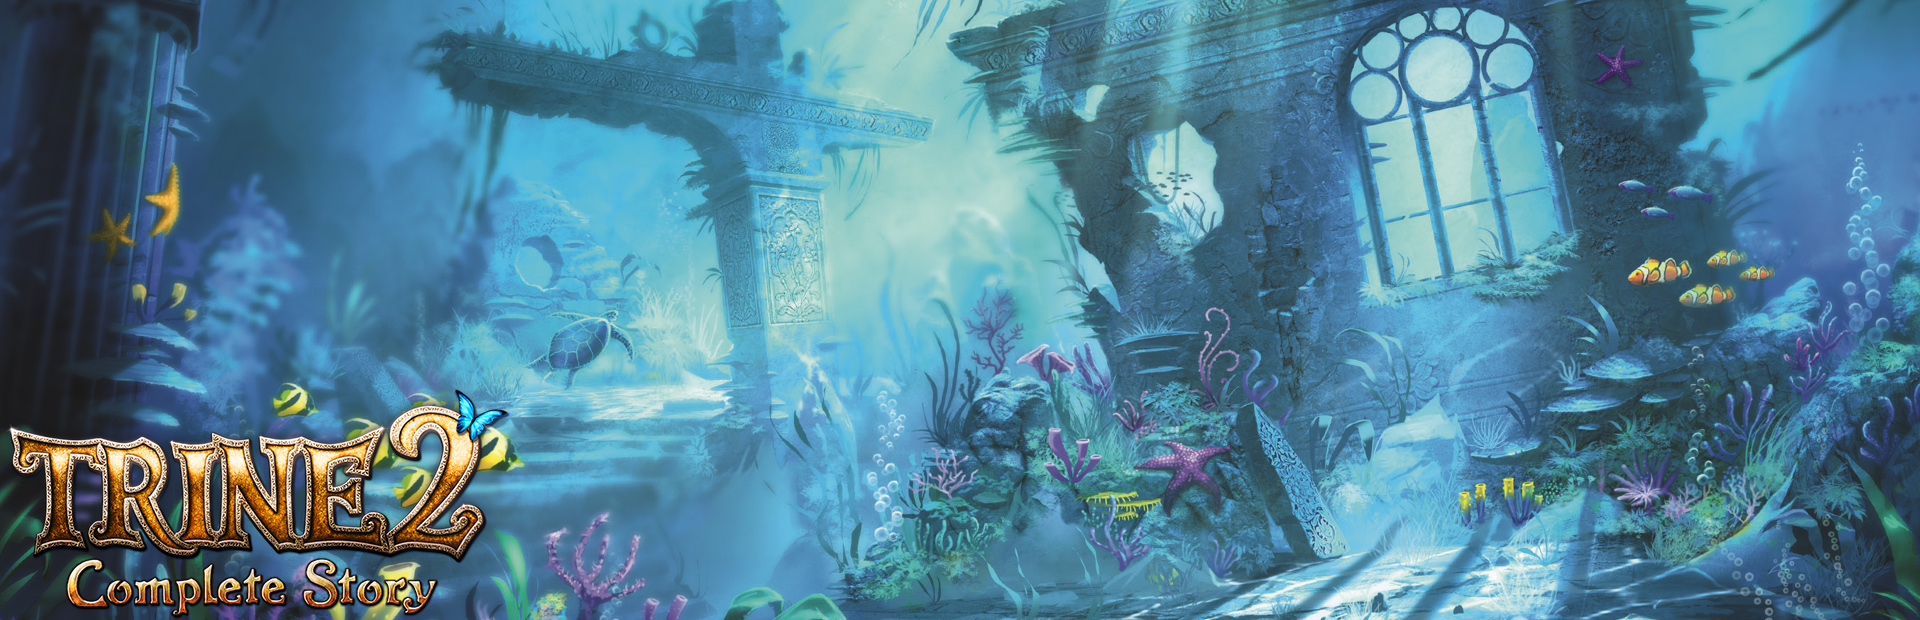 Trine.2.Complete.Story .Banner3